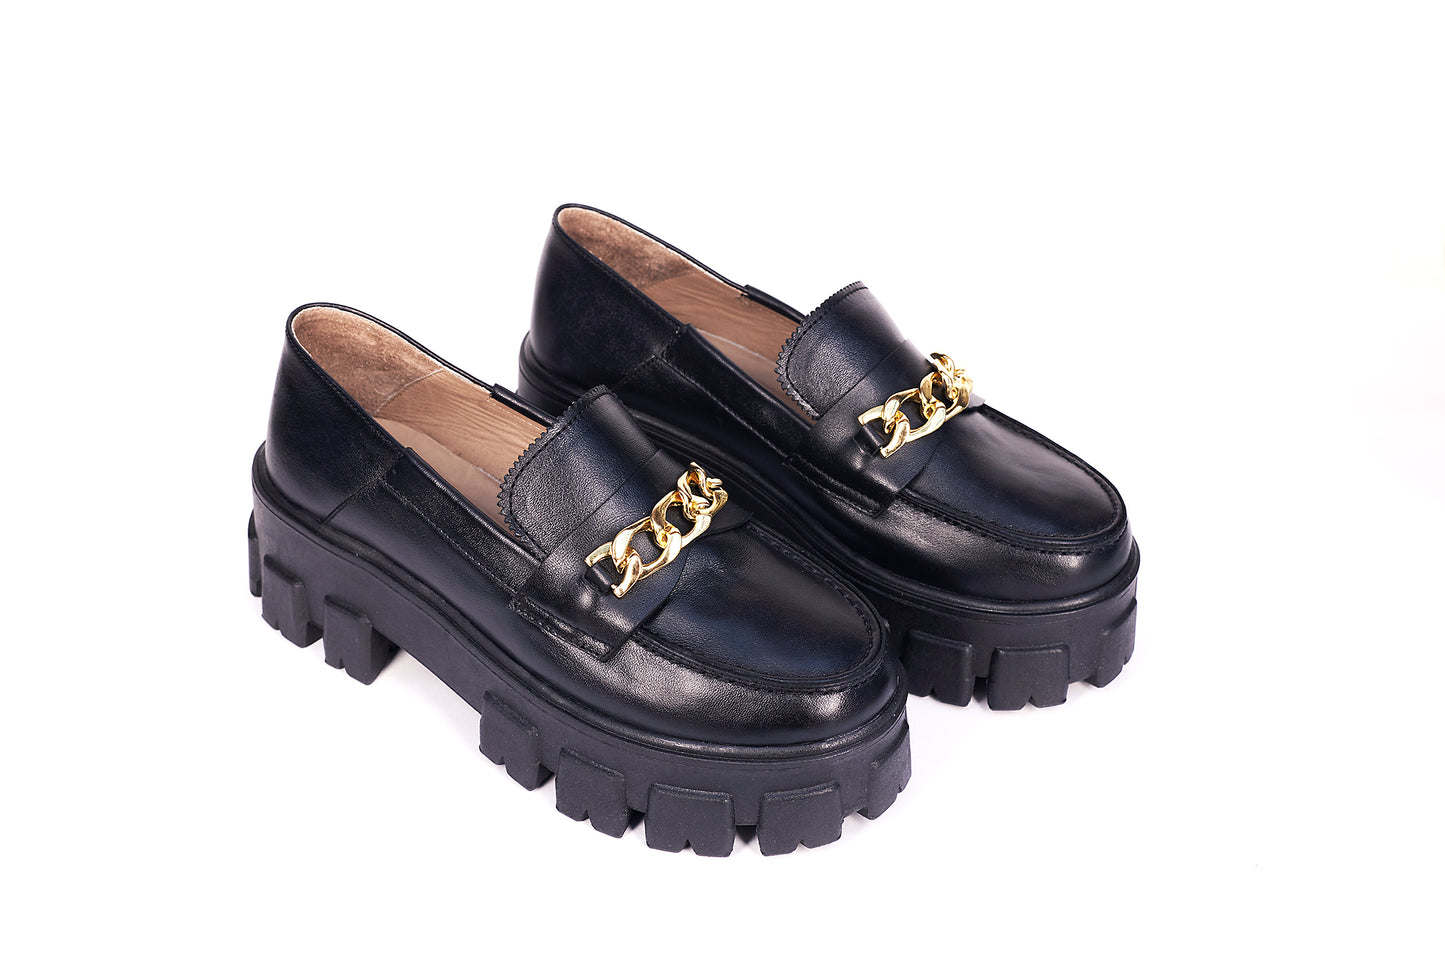 Loafers Dong - "La Viajera" Collection